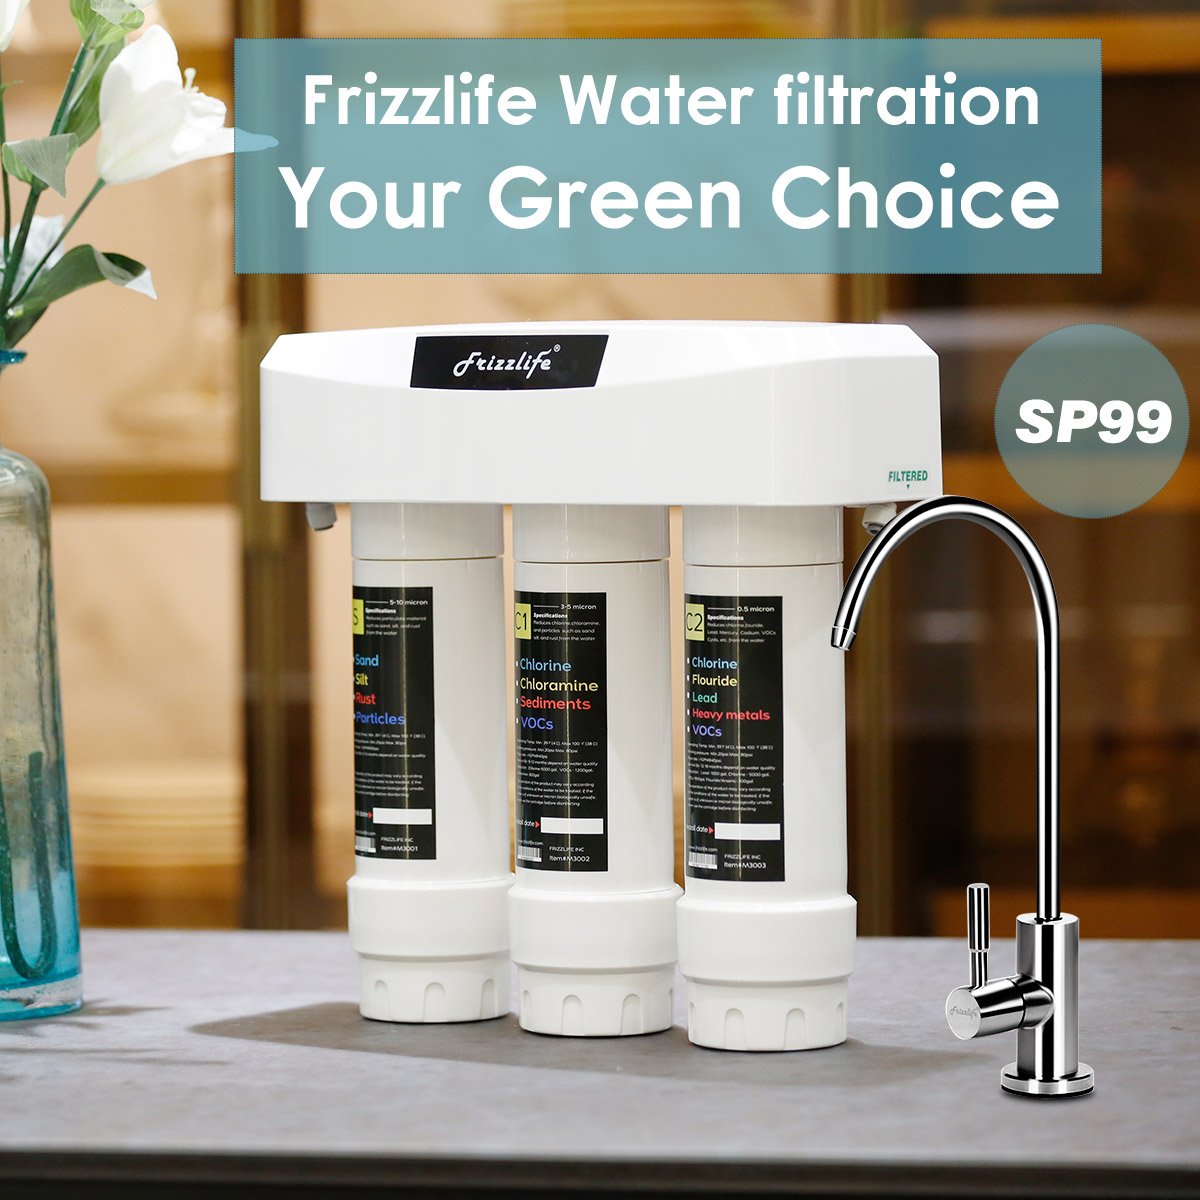 Get Fresh Water From Dedicated Faucet